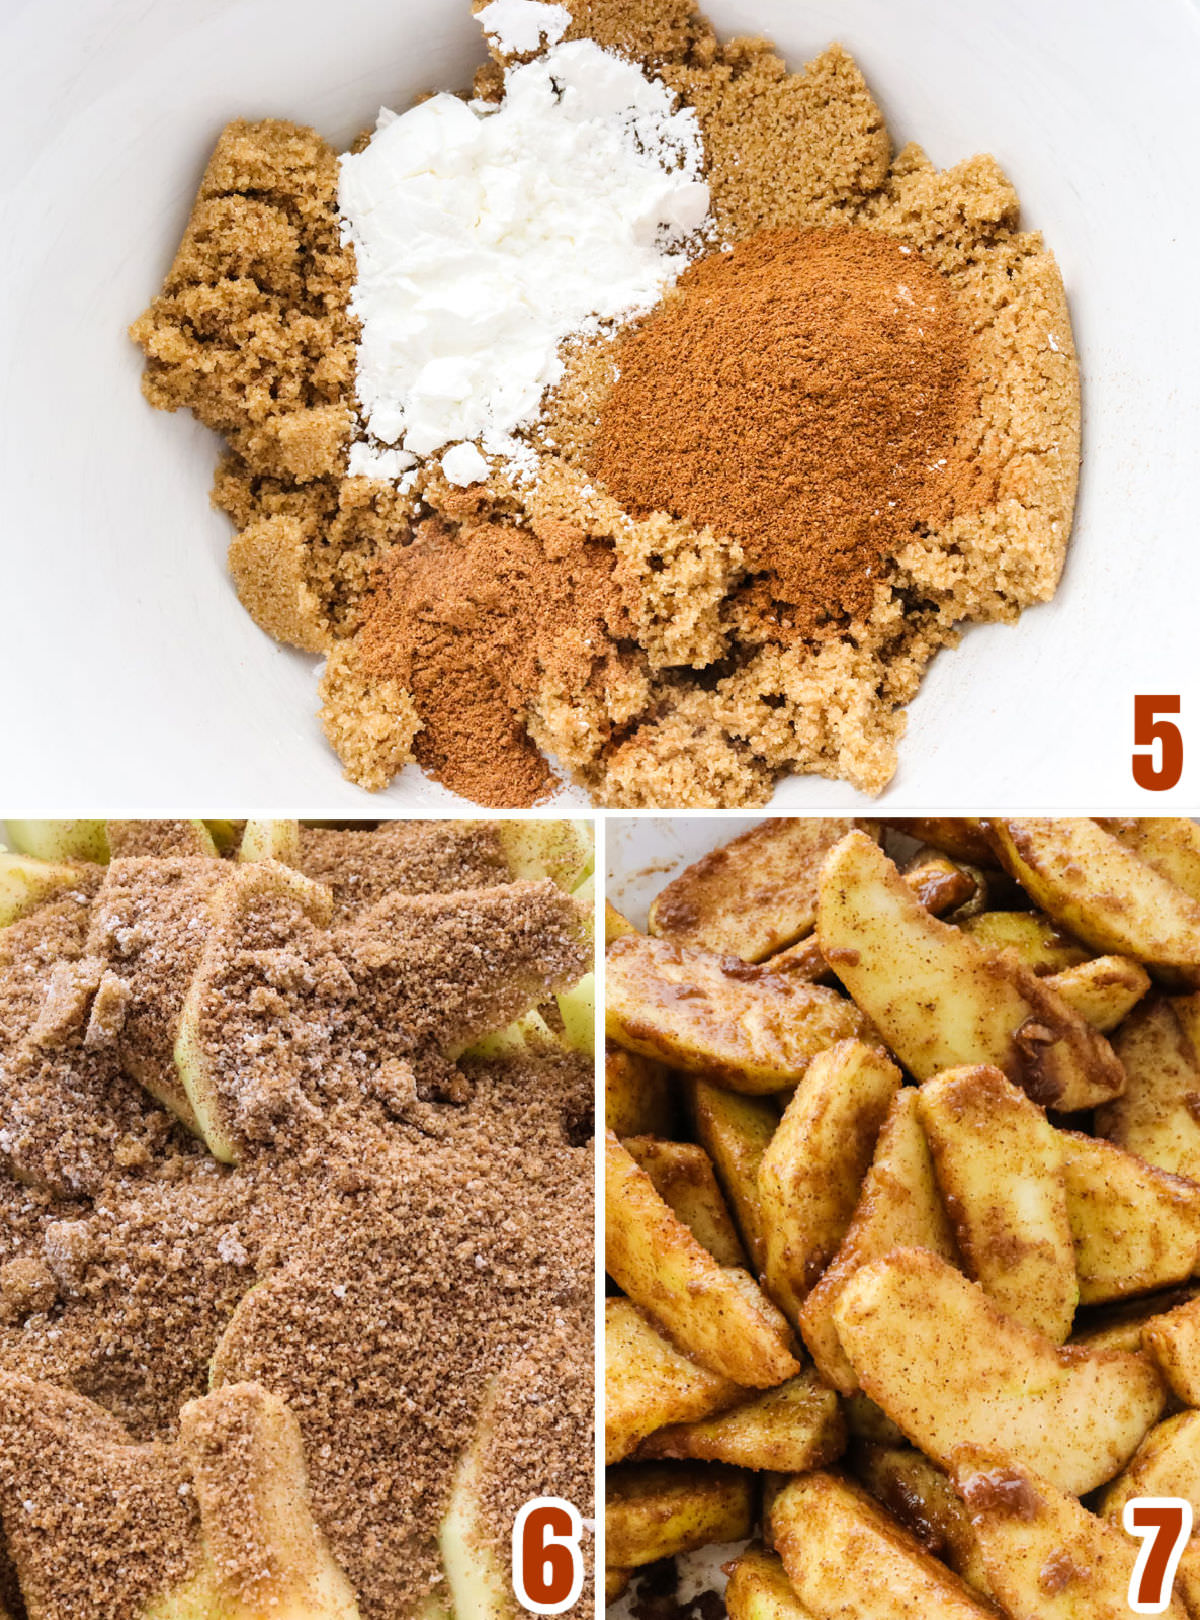 Collage image showing the steps for covering the apple slices with the cinnamon sugar mixture.